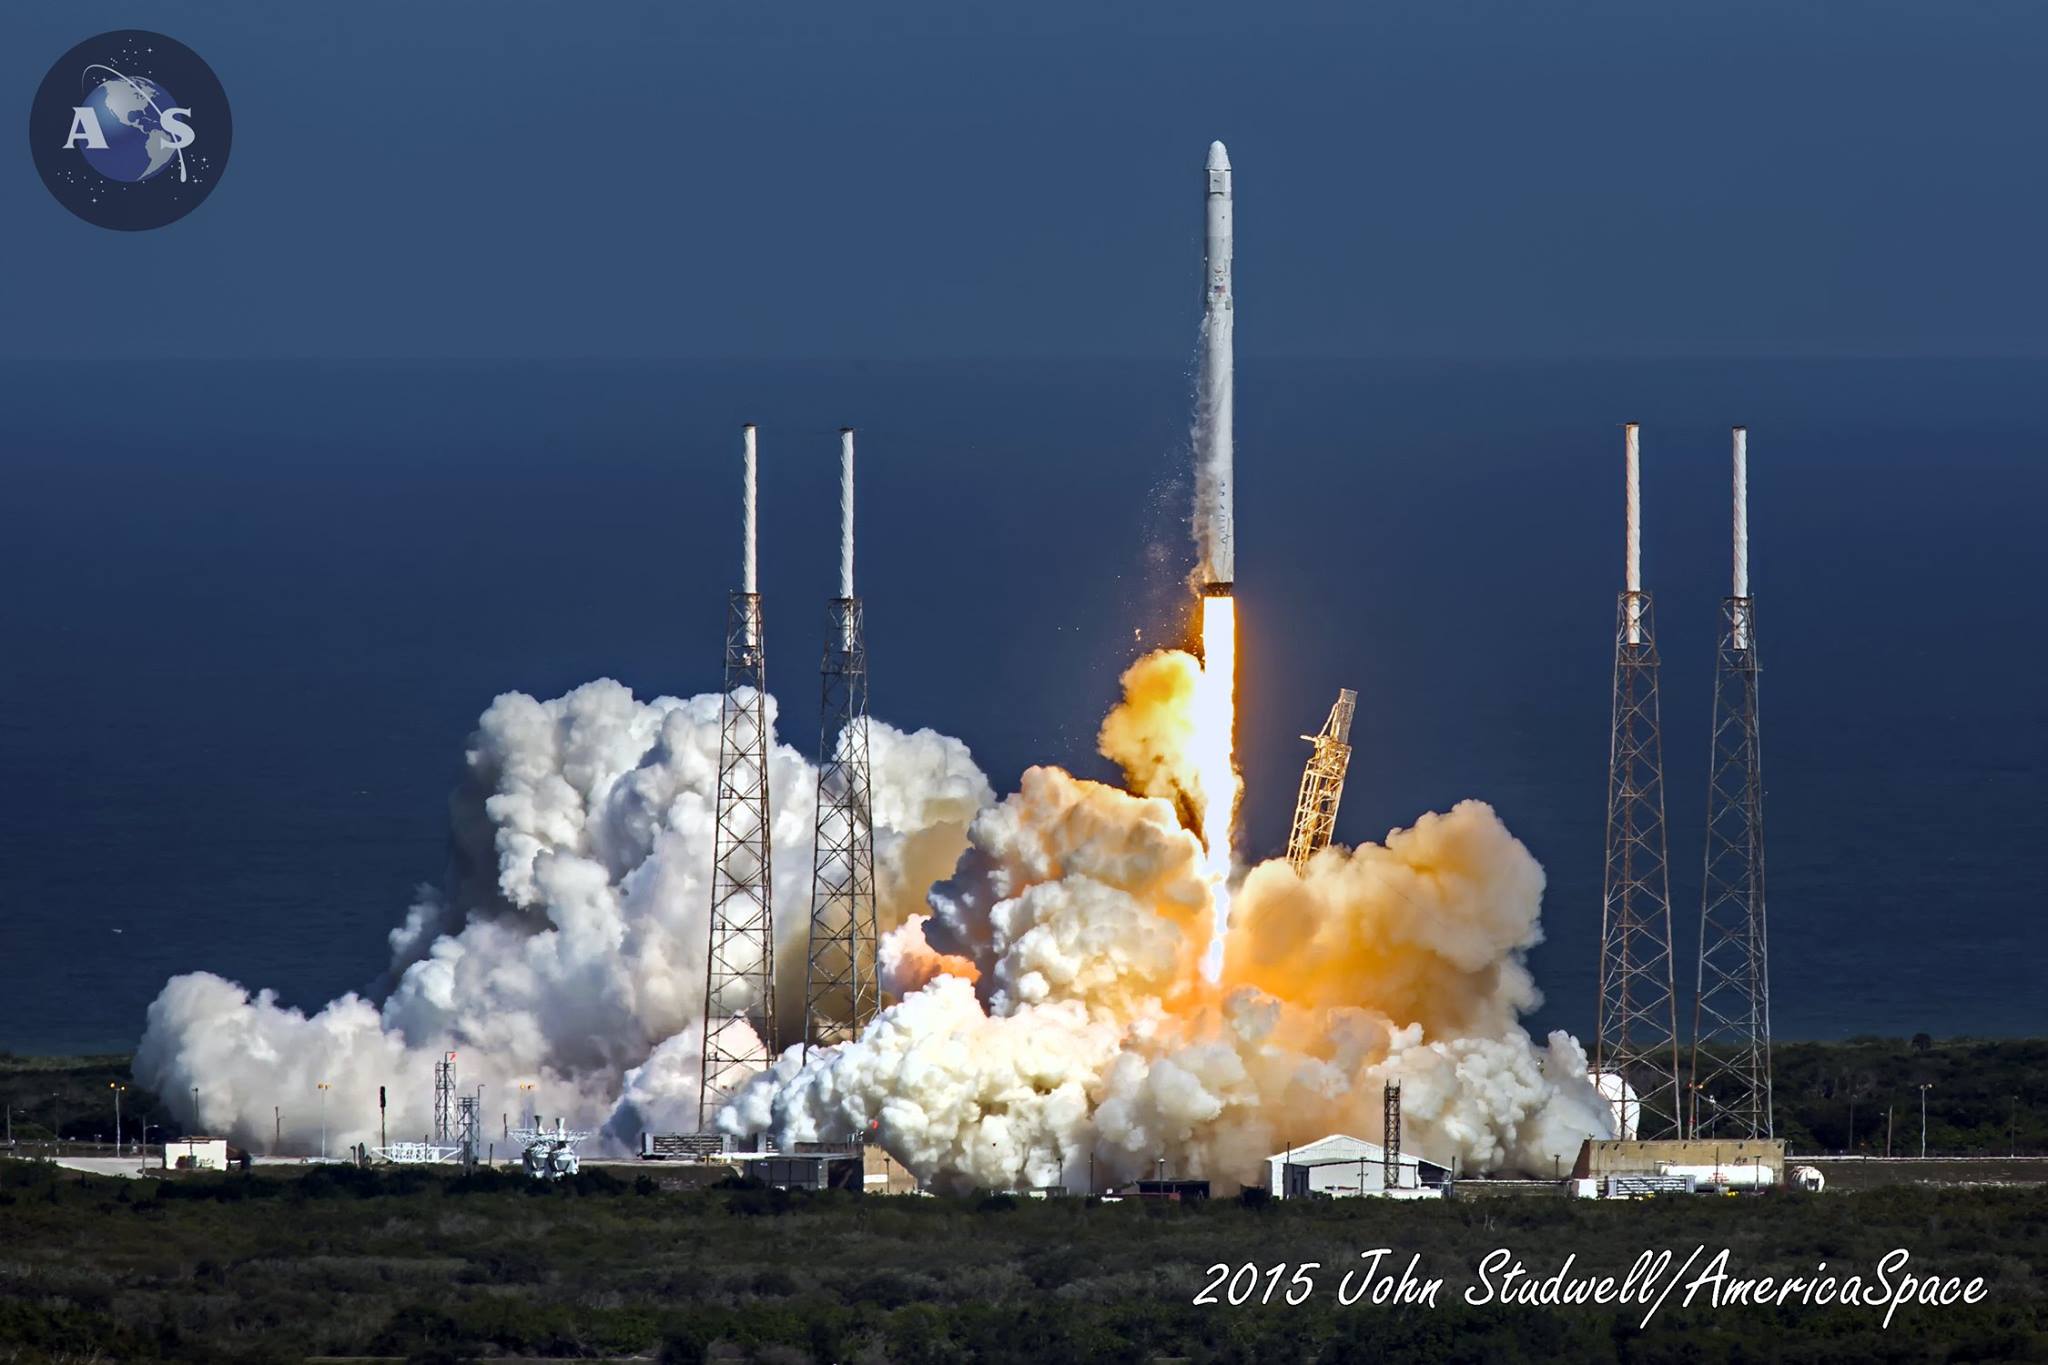 Liftoff of the SpaceX Falcon-9 rocket to deliver the company's sixth dedicated Dragon resupply mission to the International Space Station on April 14, 2015 at 4:10 p.m. EDT from Cape Canaveral, Fla. Photo Credit: John Studwell / AmericaSpace 